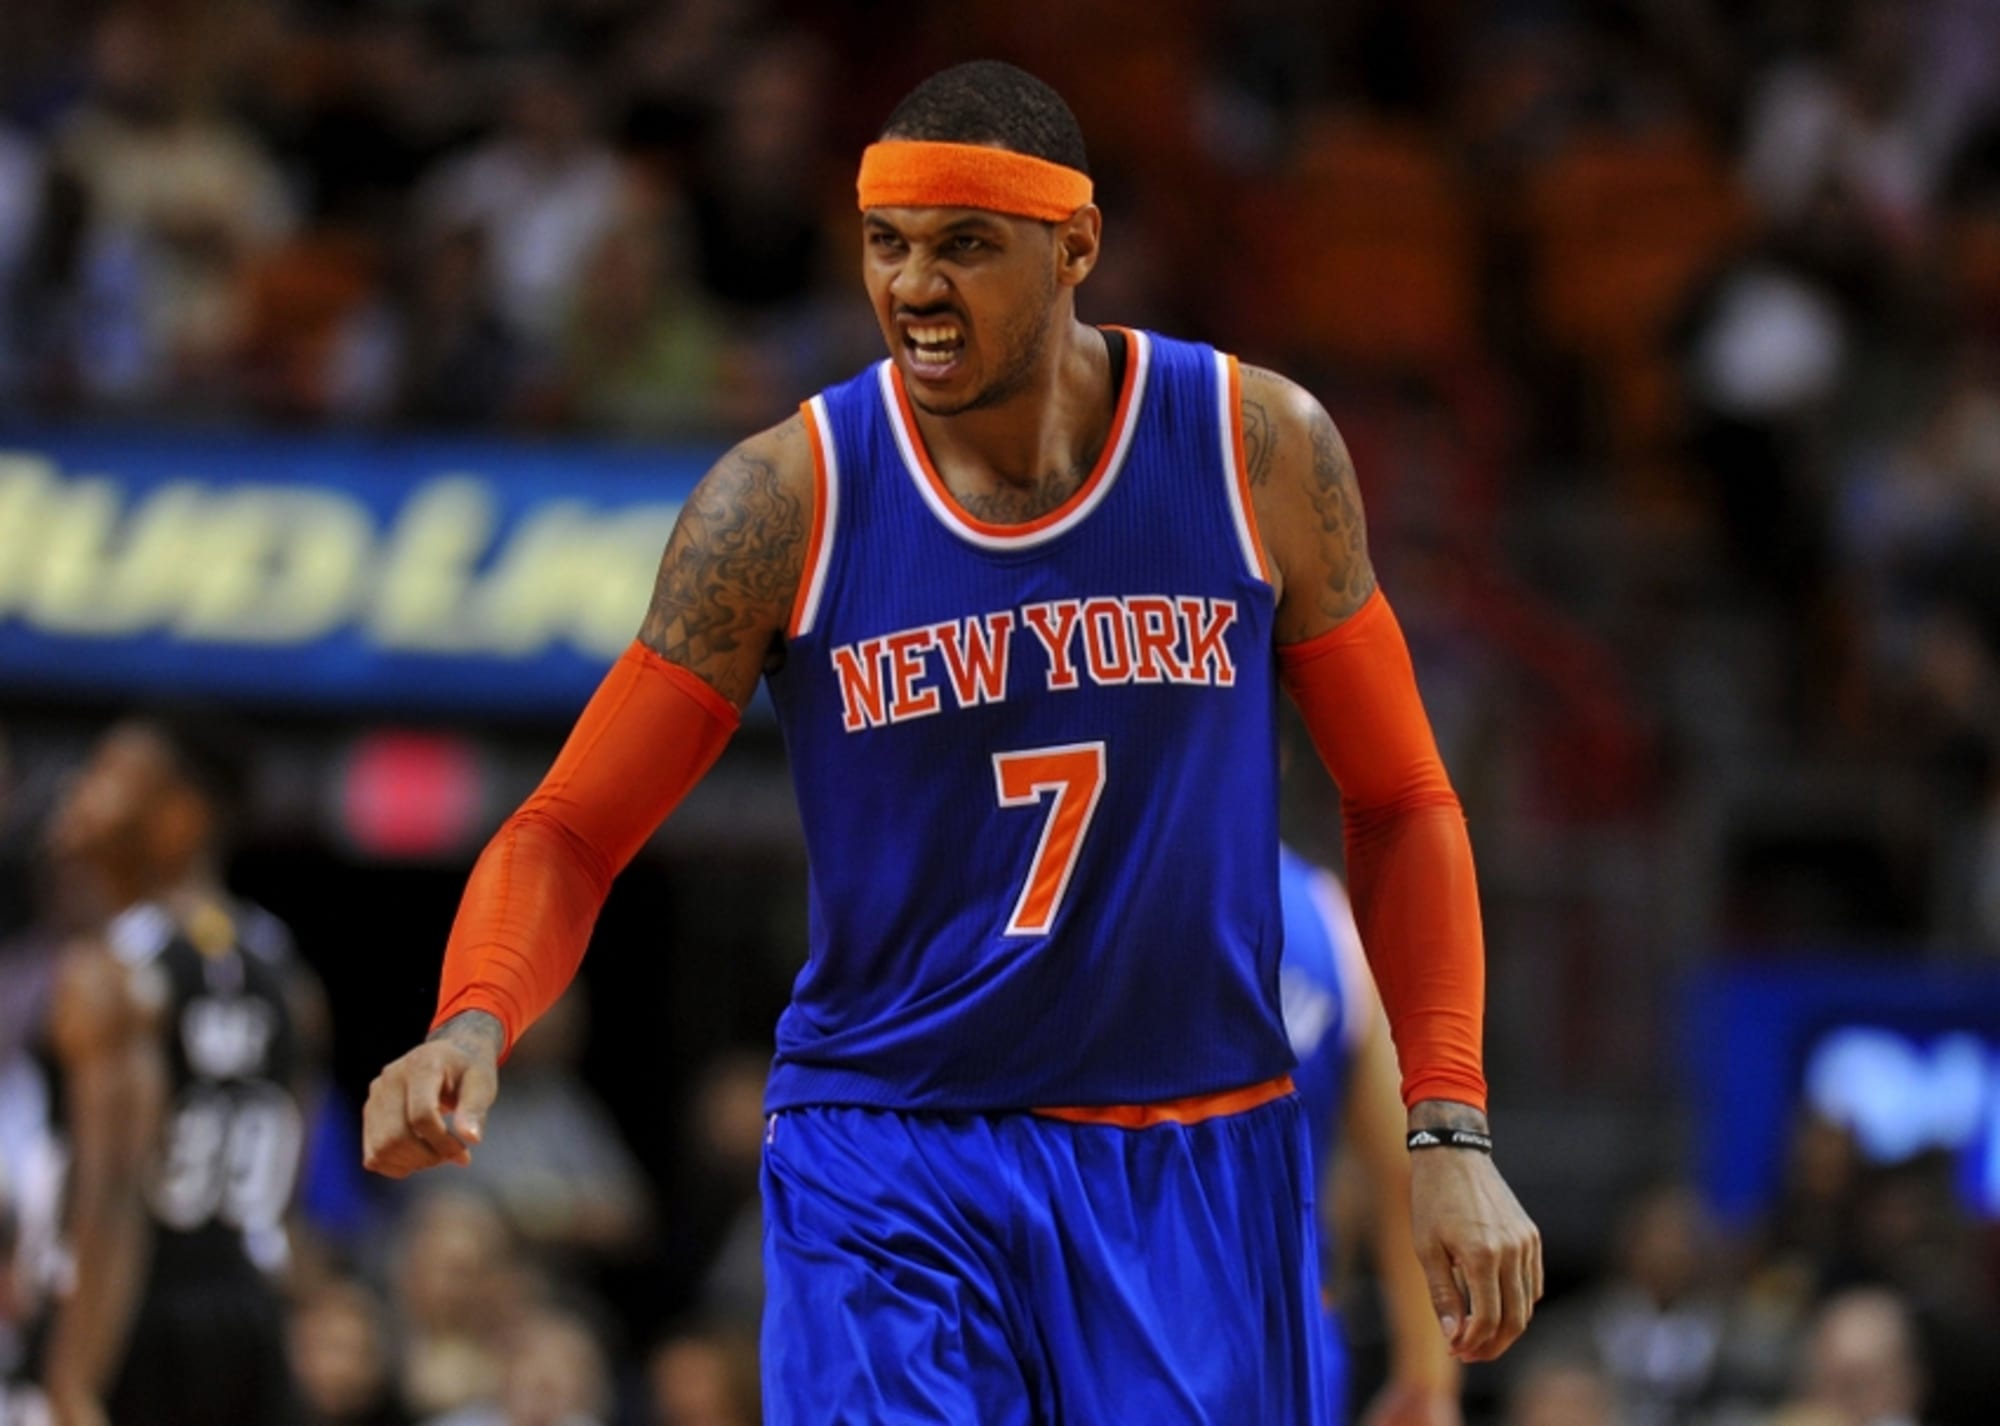 Phil Jackson 'coming on board' with Knicks: Anthony